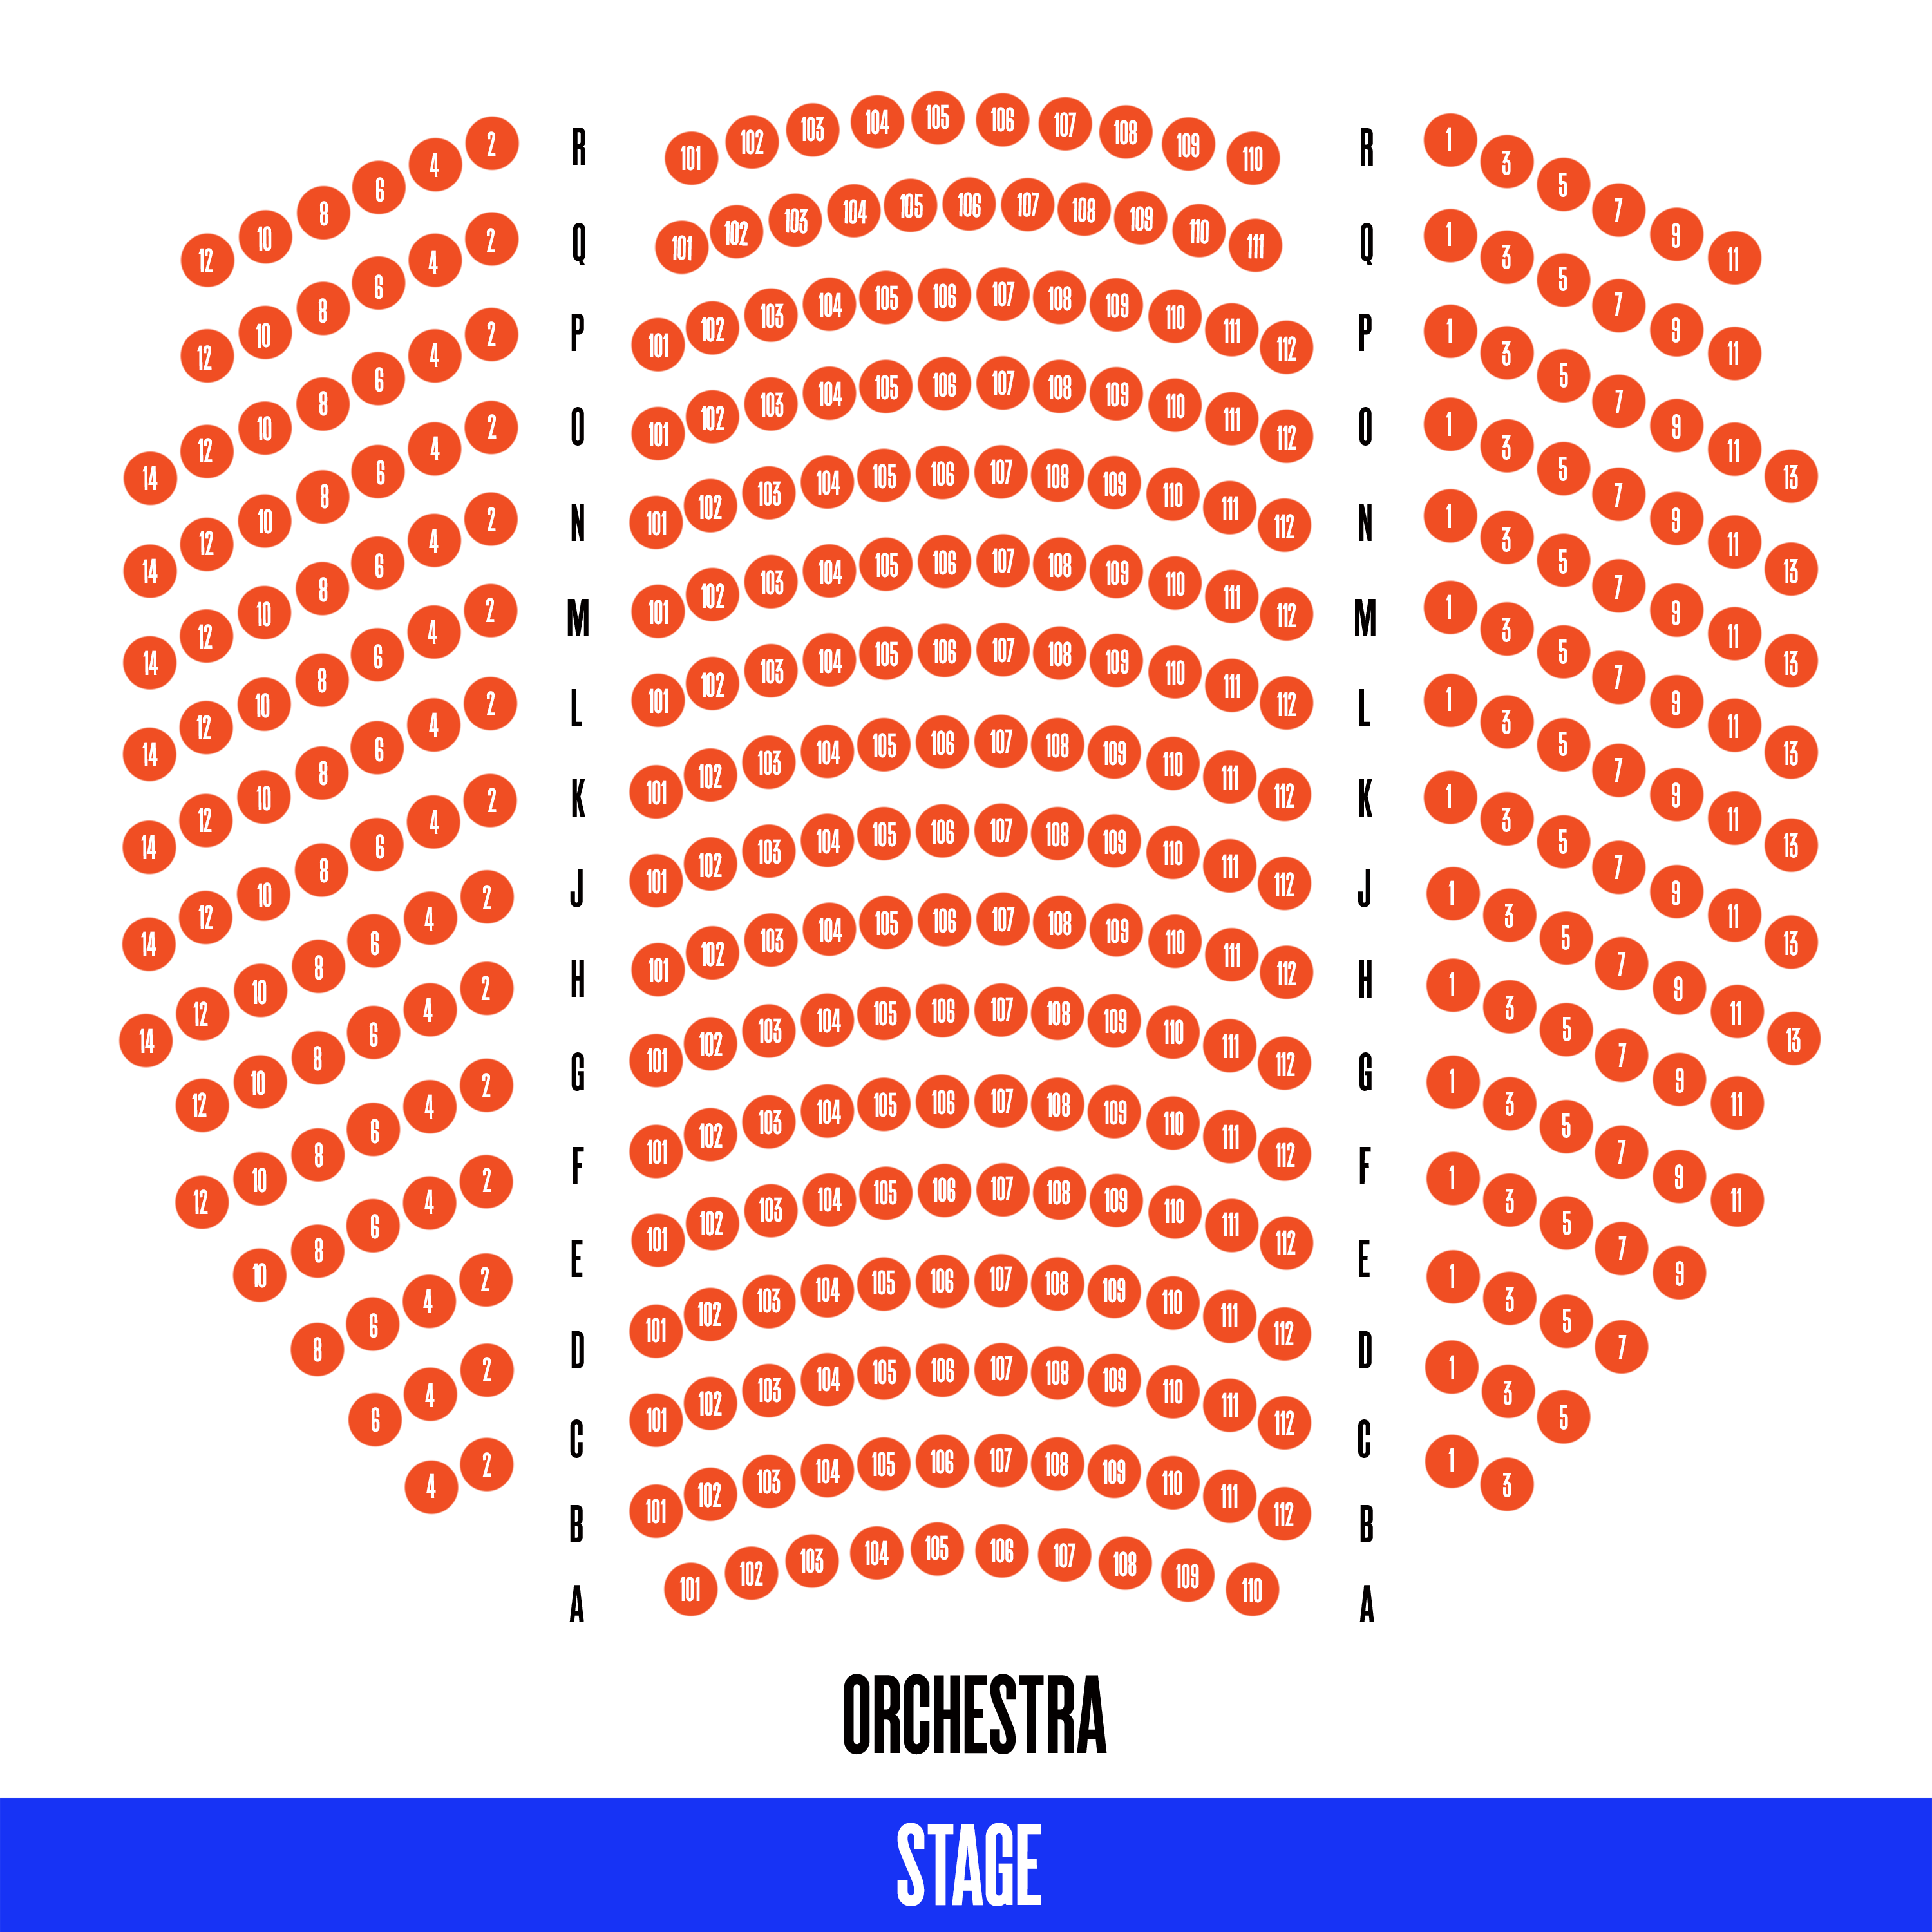 Helen Hayes Theatre Broadway Seating Chart 